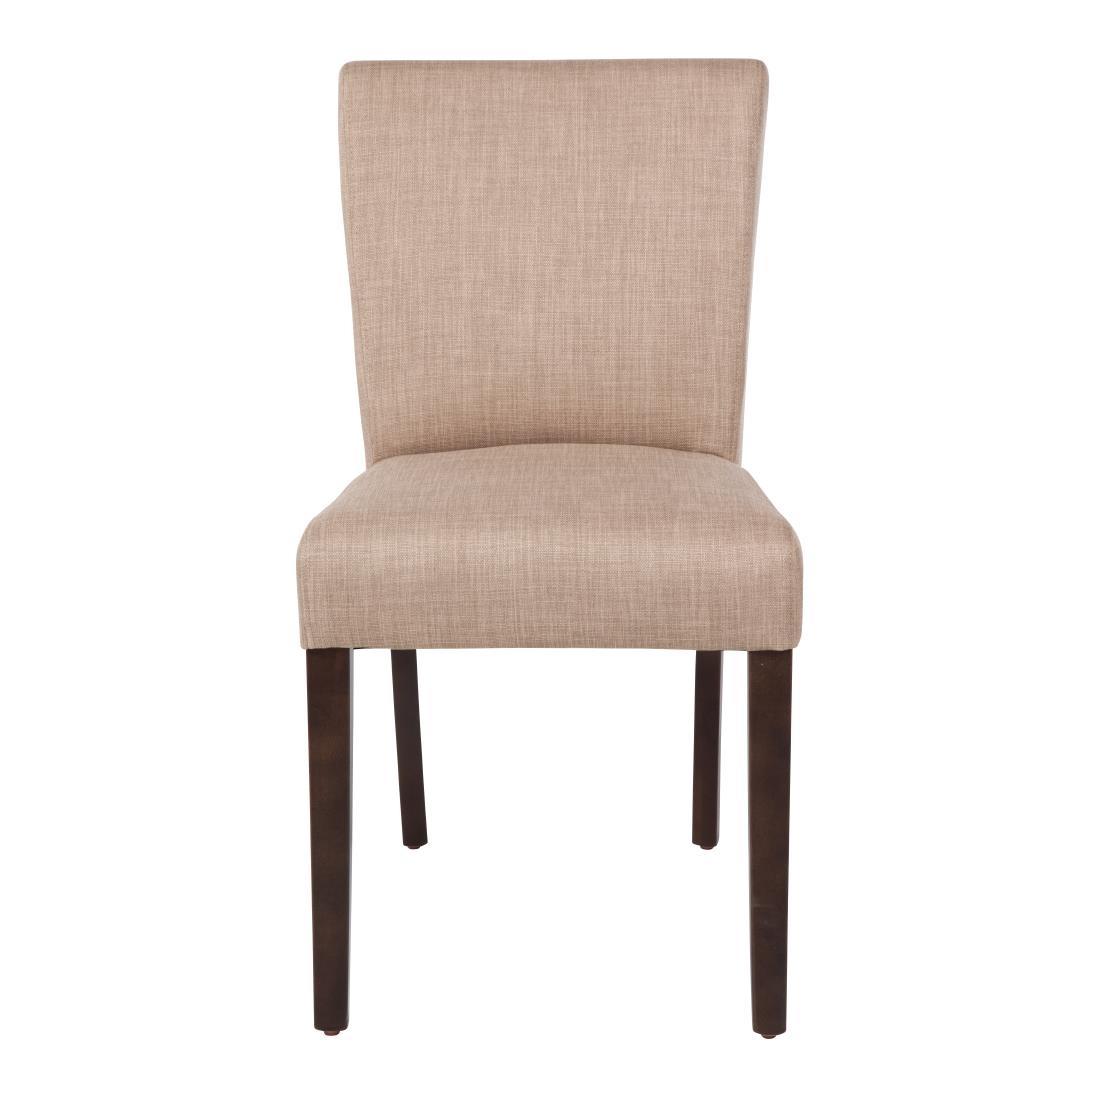 GR367 - Bolero Contemporary Dining Chair Natural (Pack 2) - GR367  - 2